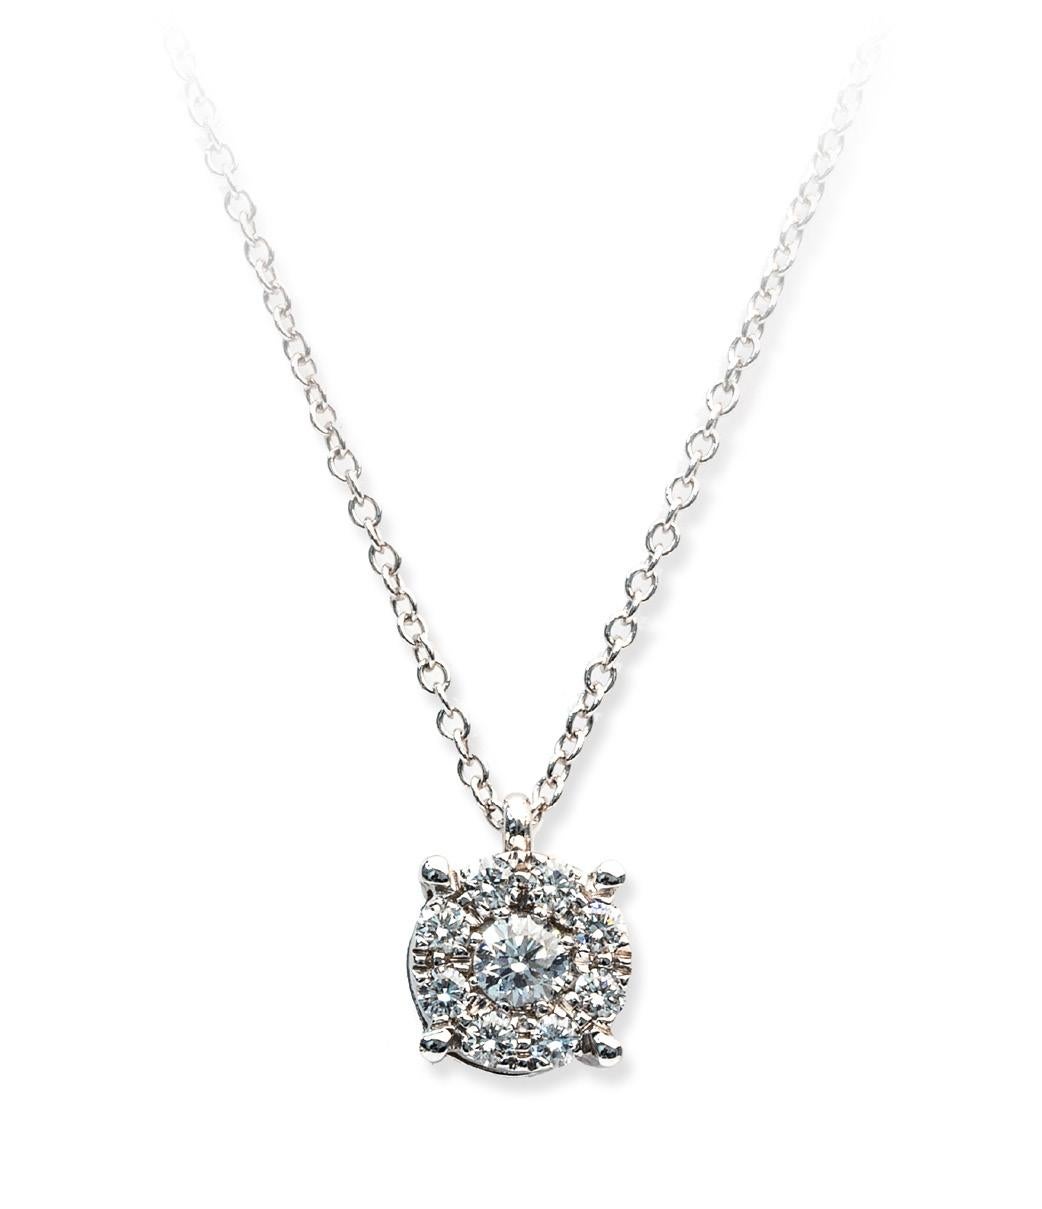 This exquisite Magic pendant features a dazzling central round brilliant-cut diamond weighing 0.20 Ct, boasting a stunning E-F color grade and VS clarity. The captivating centerpiece is elegantly complemented by additional diamonds, contributing to